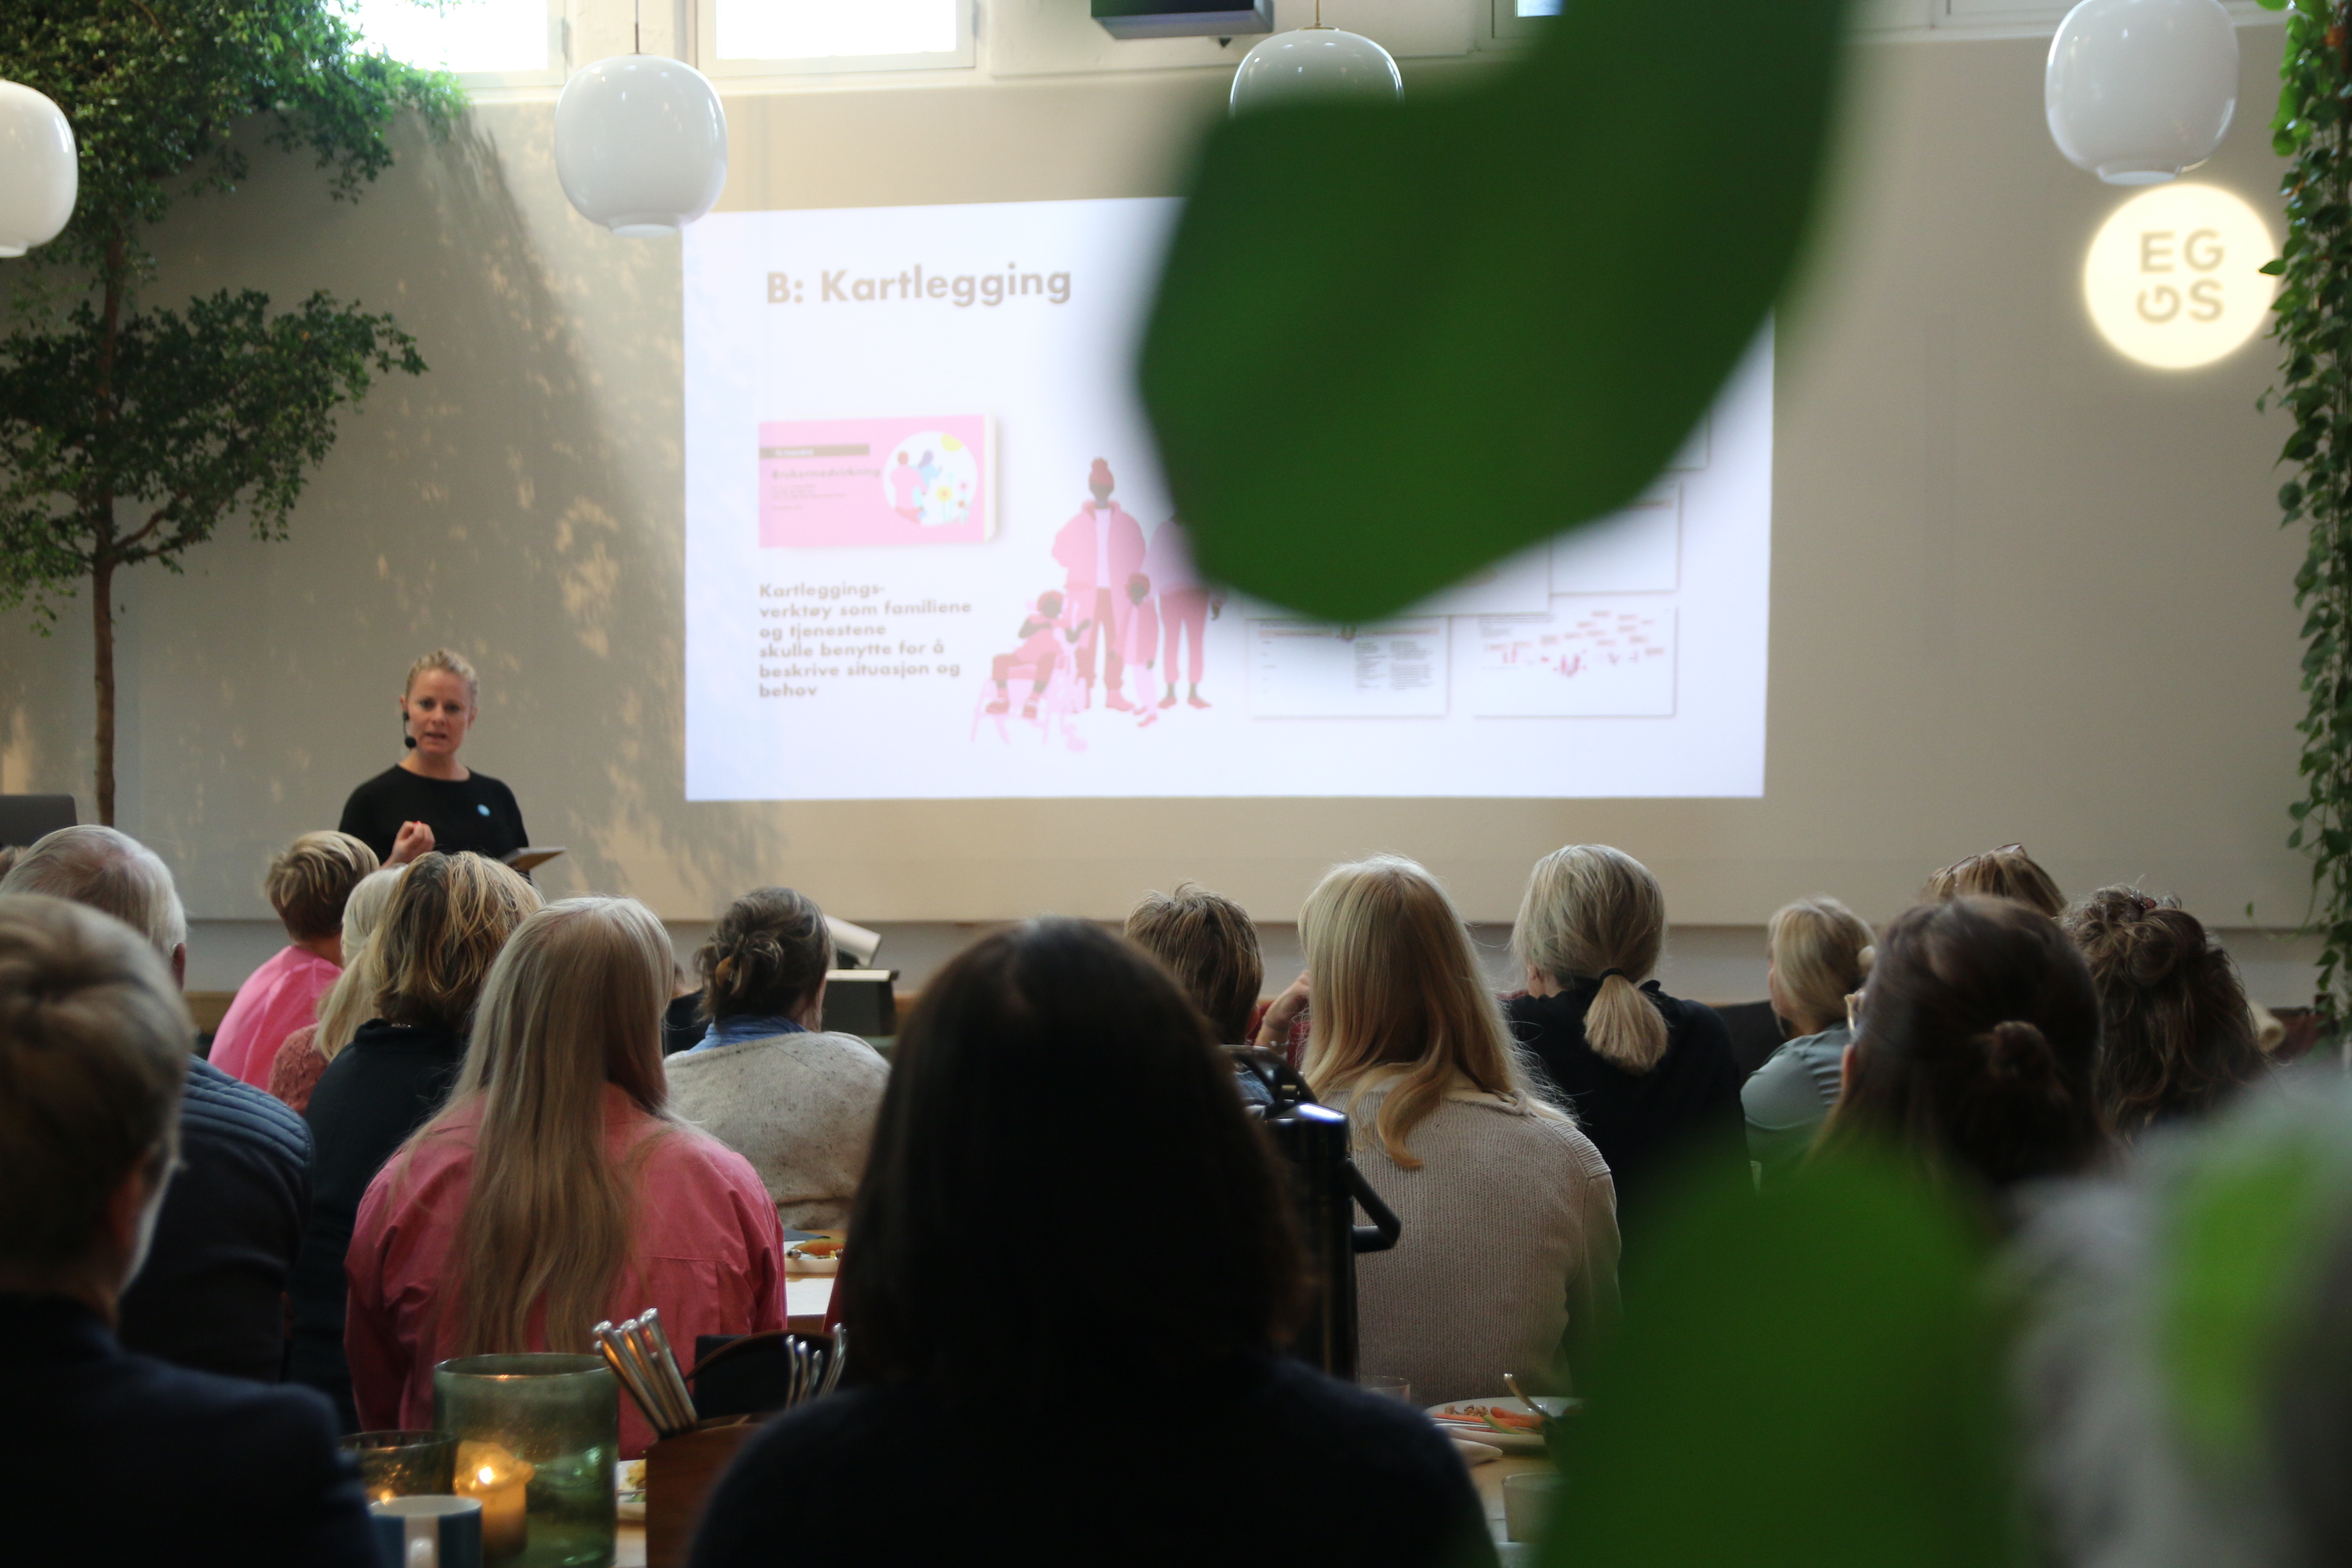 Event image showing a speaker and her audience